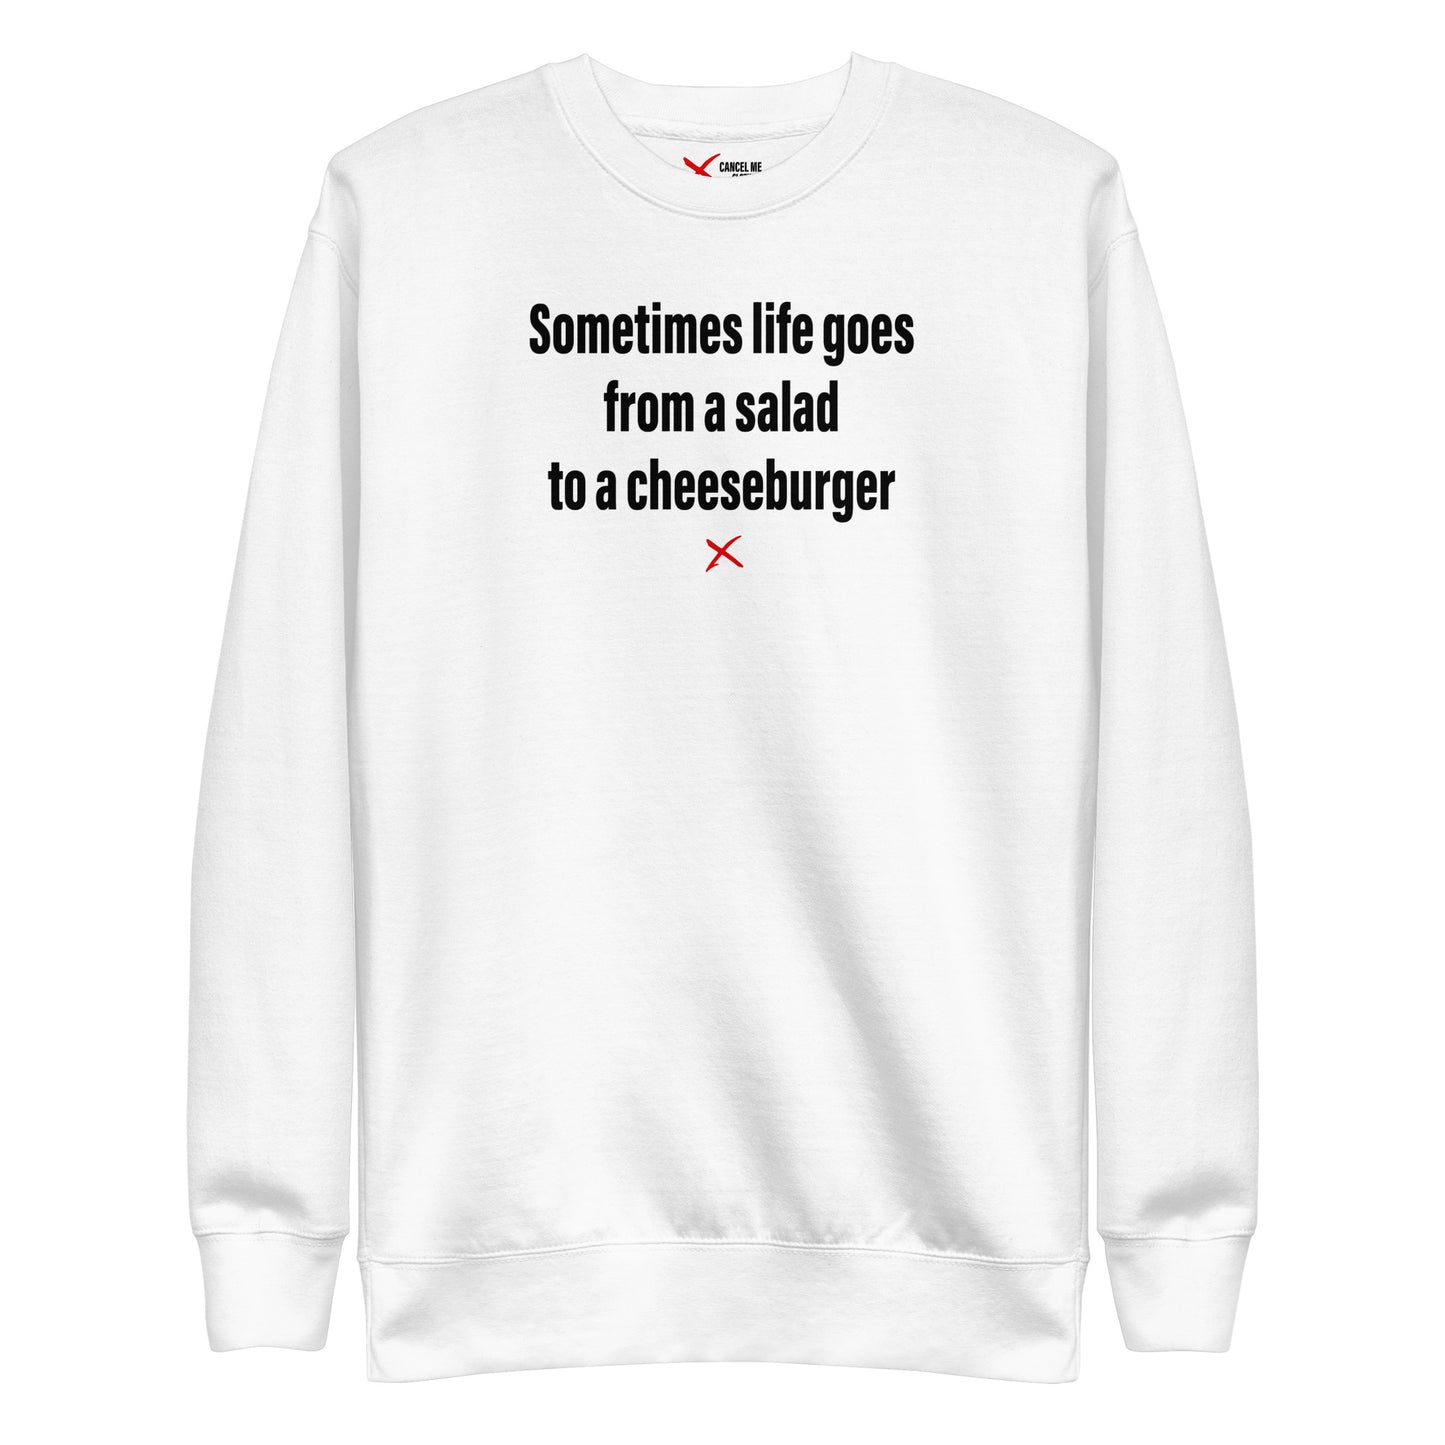 Sometimes life goes from a salad to a cheeseburger - Sweatshirt